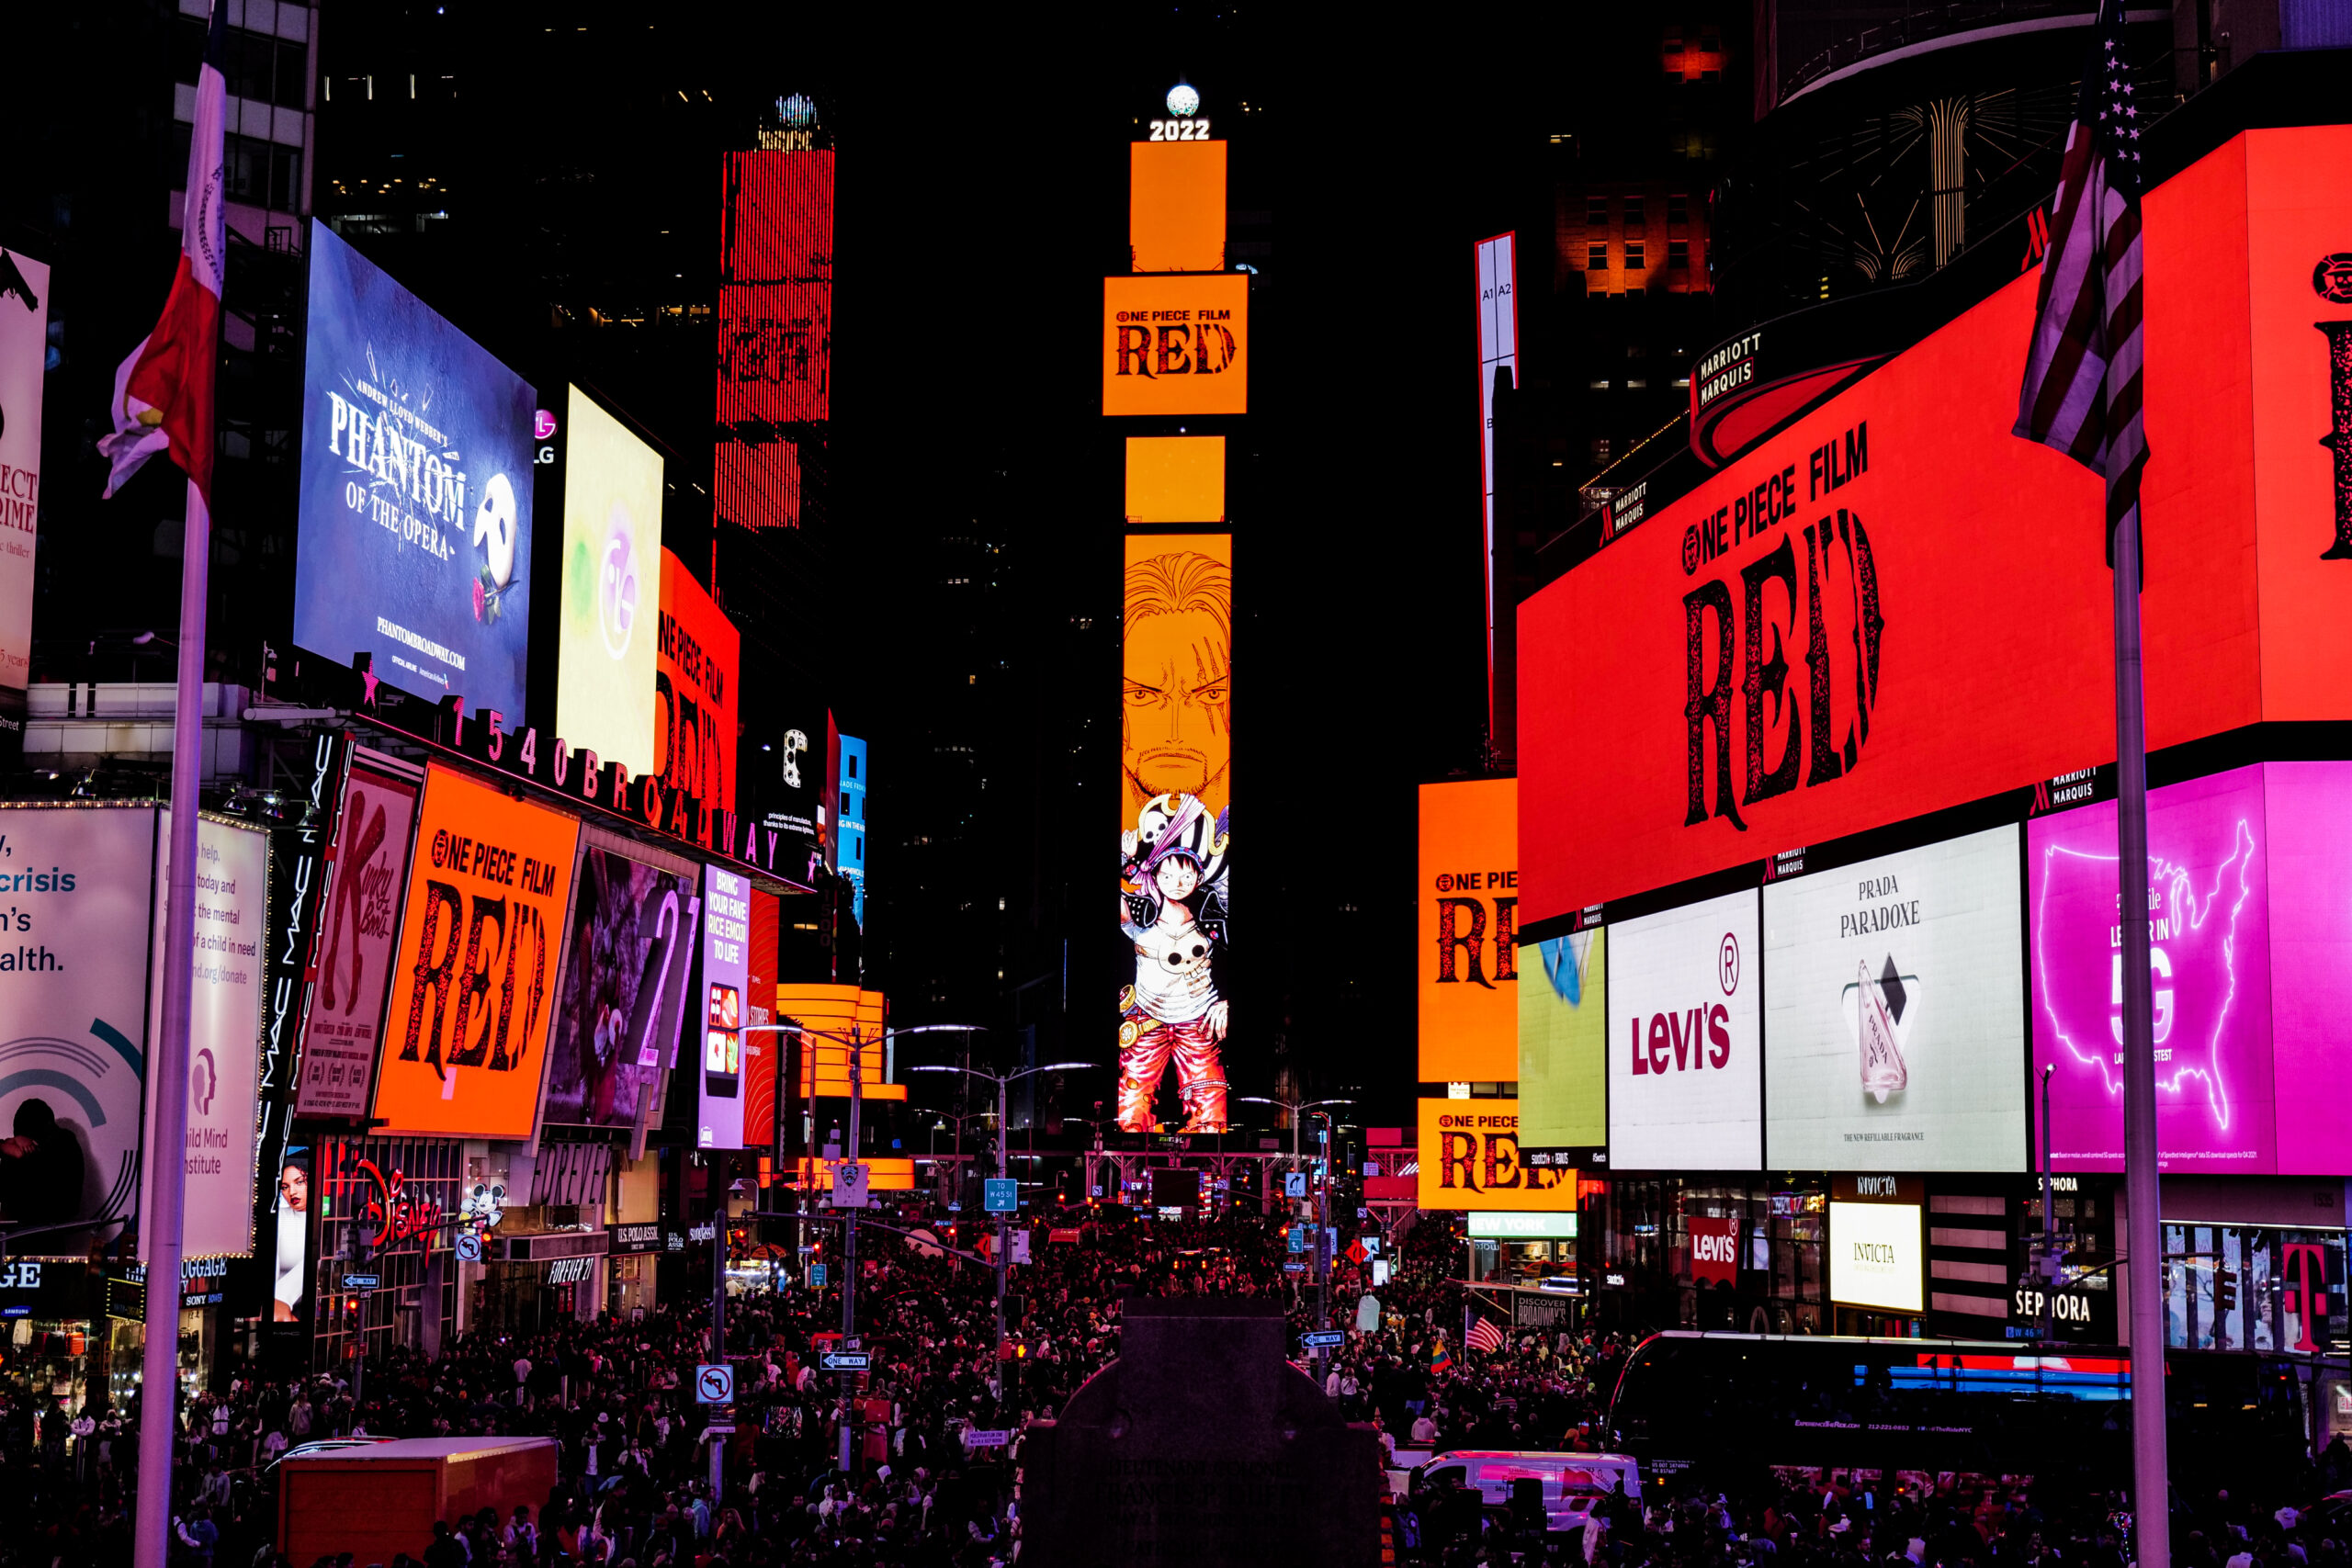 One Piece Film Red takes over Times Square ahead of premiere